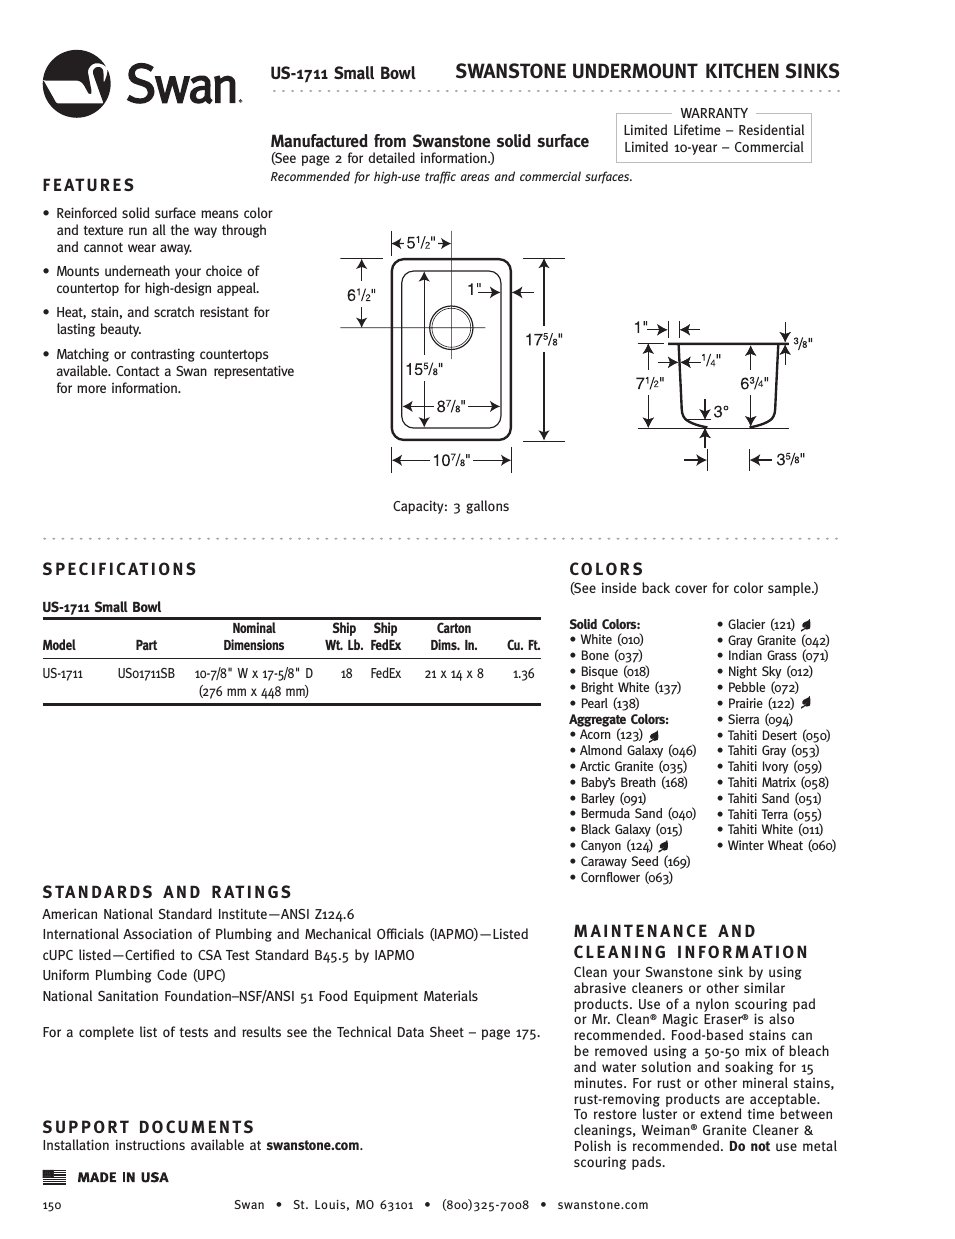 US-1711 - Specification